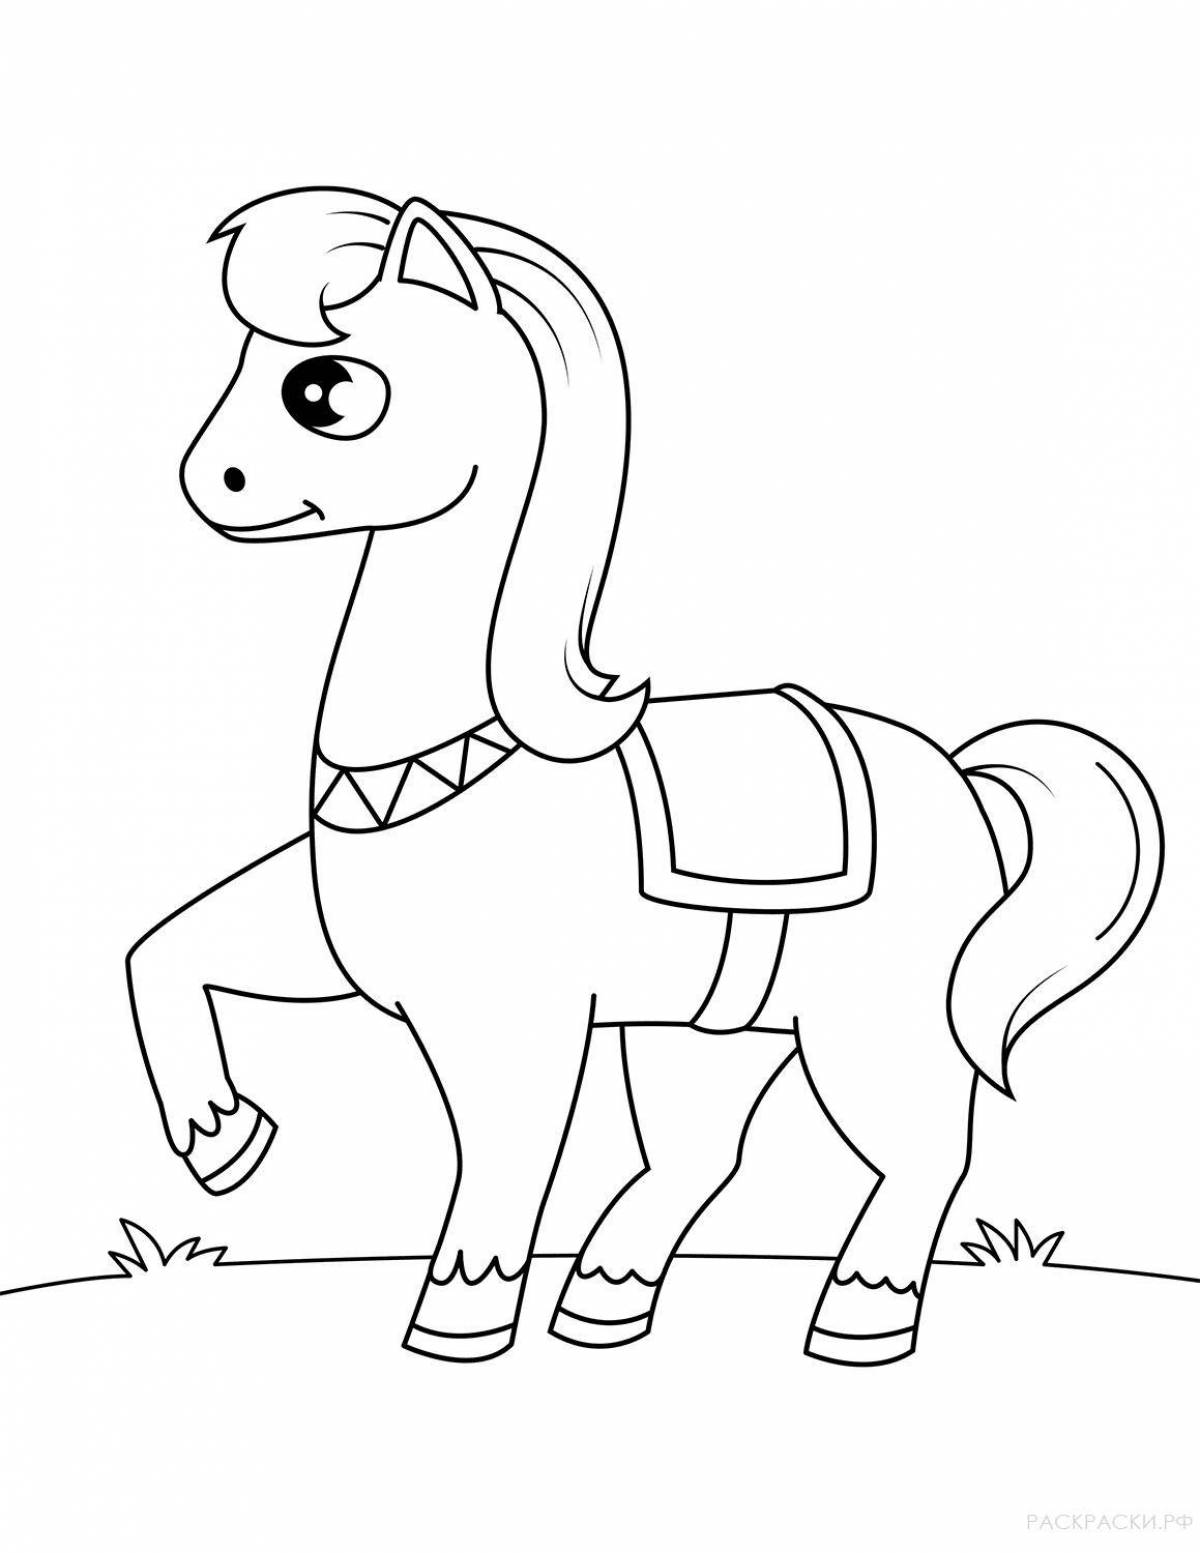 Wonderful horse coloring book for children 4-5 years old